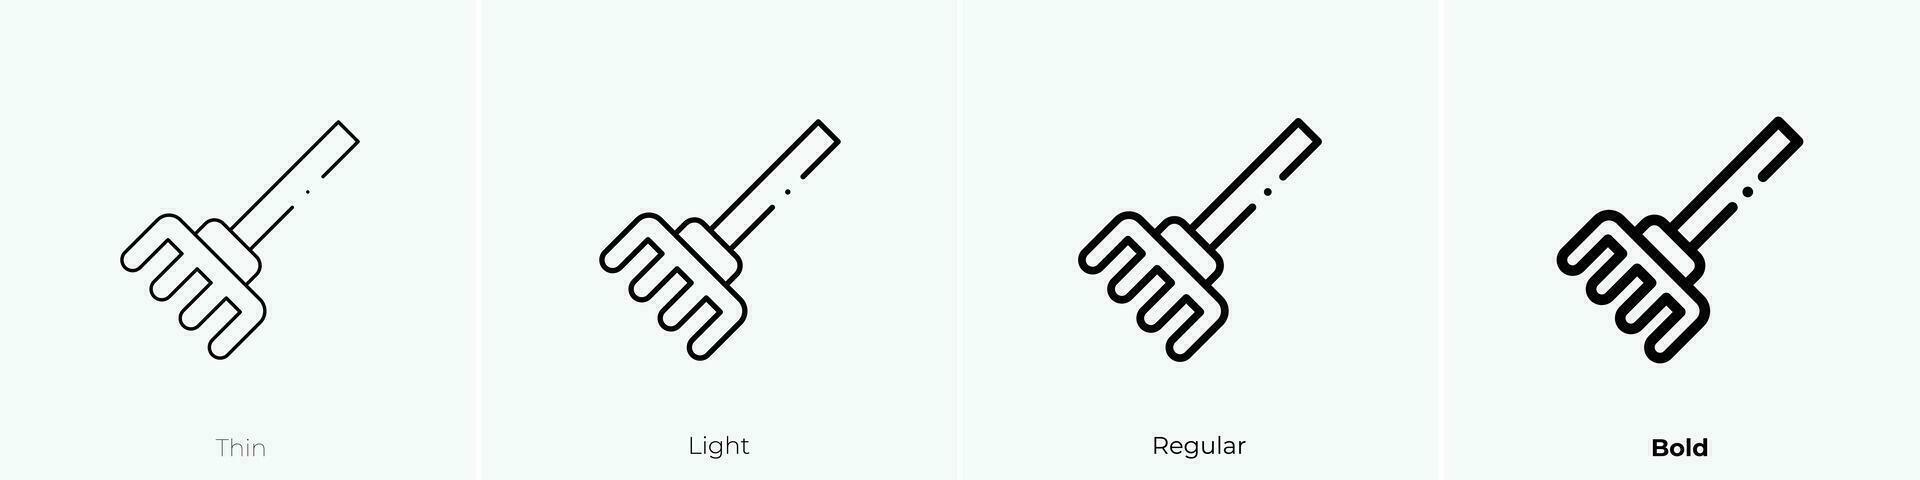 pitchfork icon. Thin, Light, Regular And Bold style design isolated on white background vector